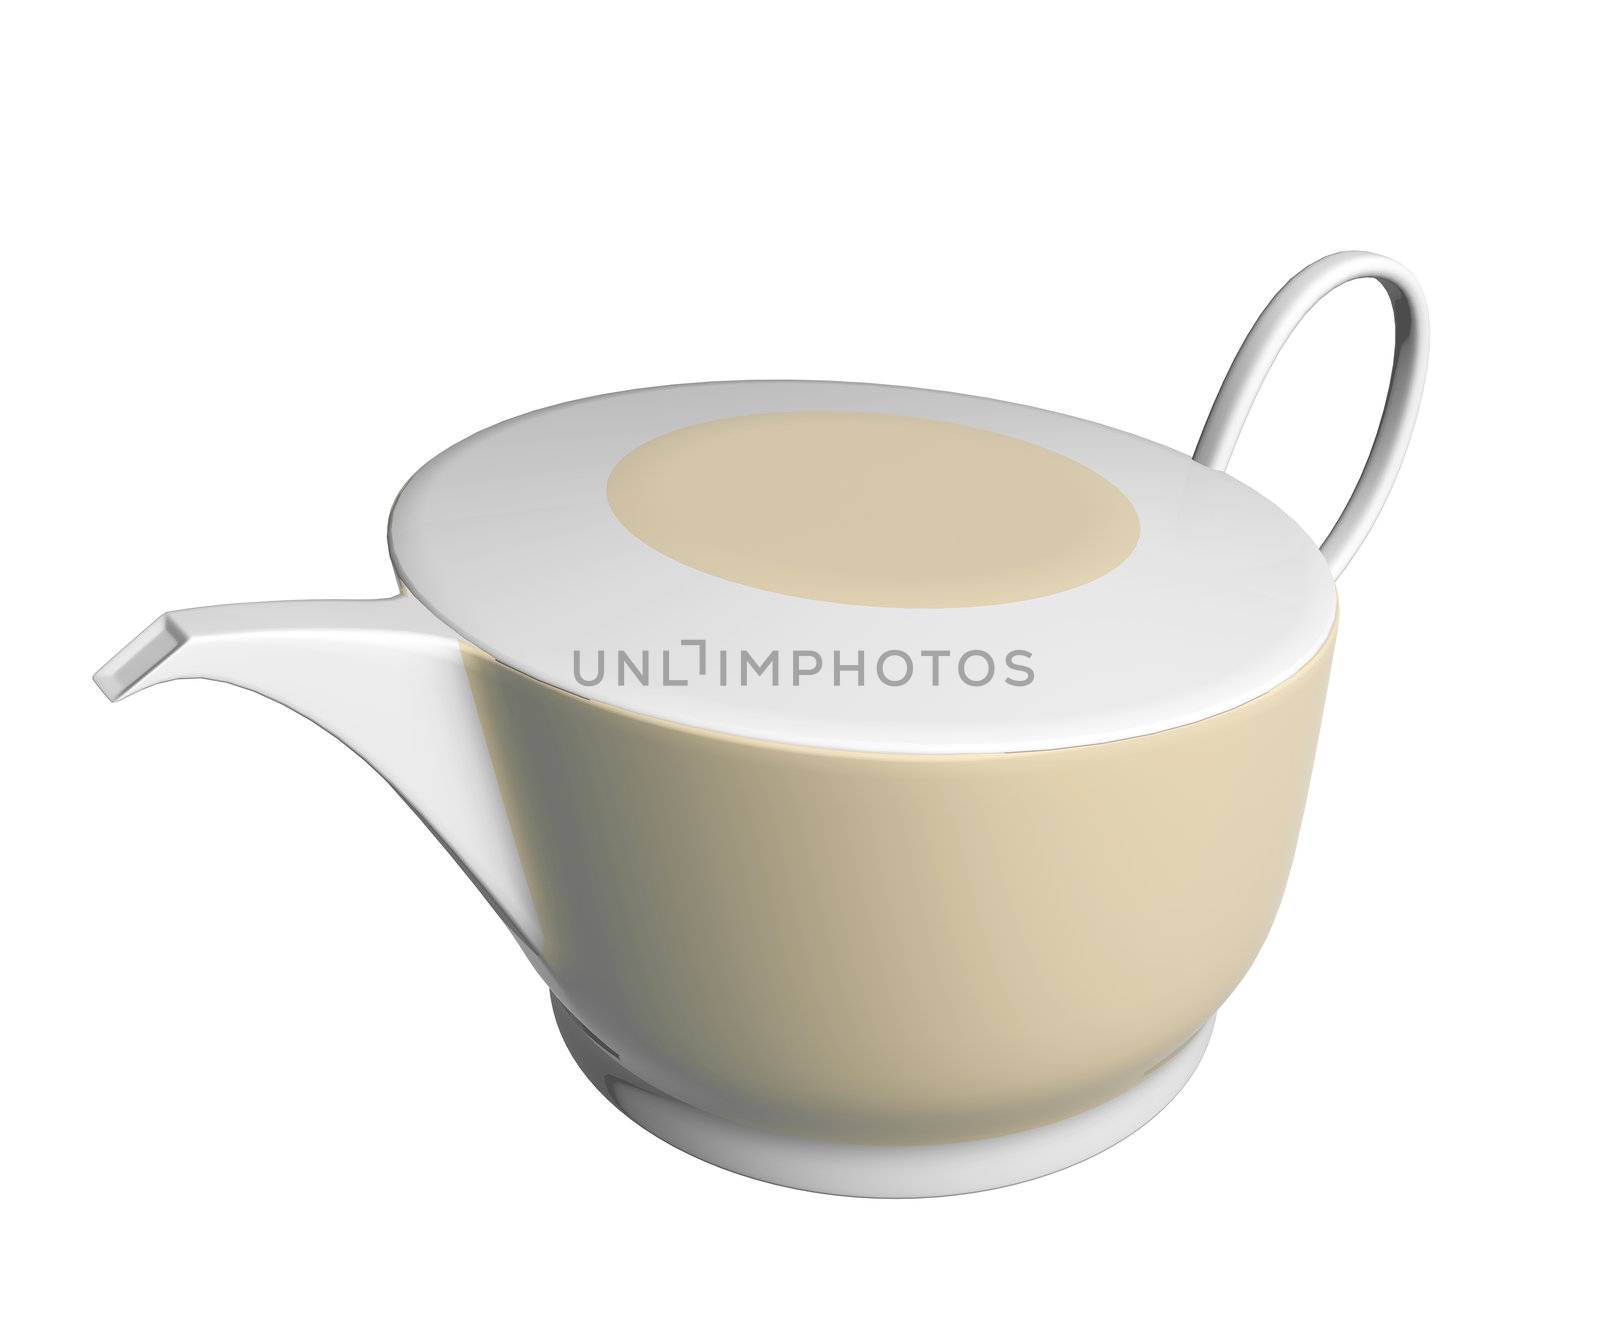 White and beige ceramic tea pot, 3D illustration, isolated against a white background